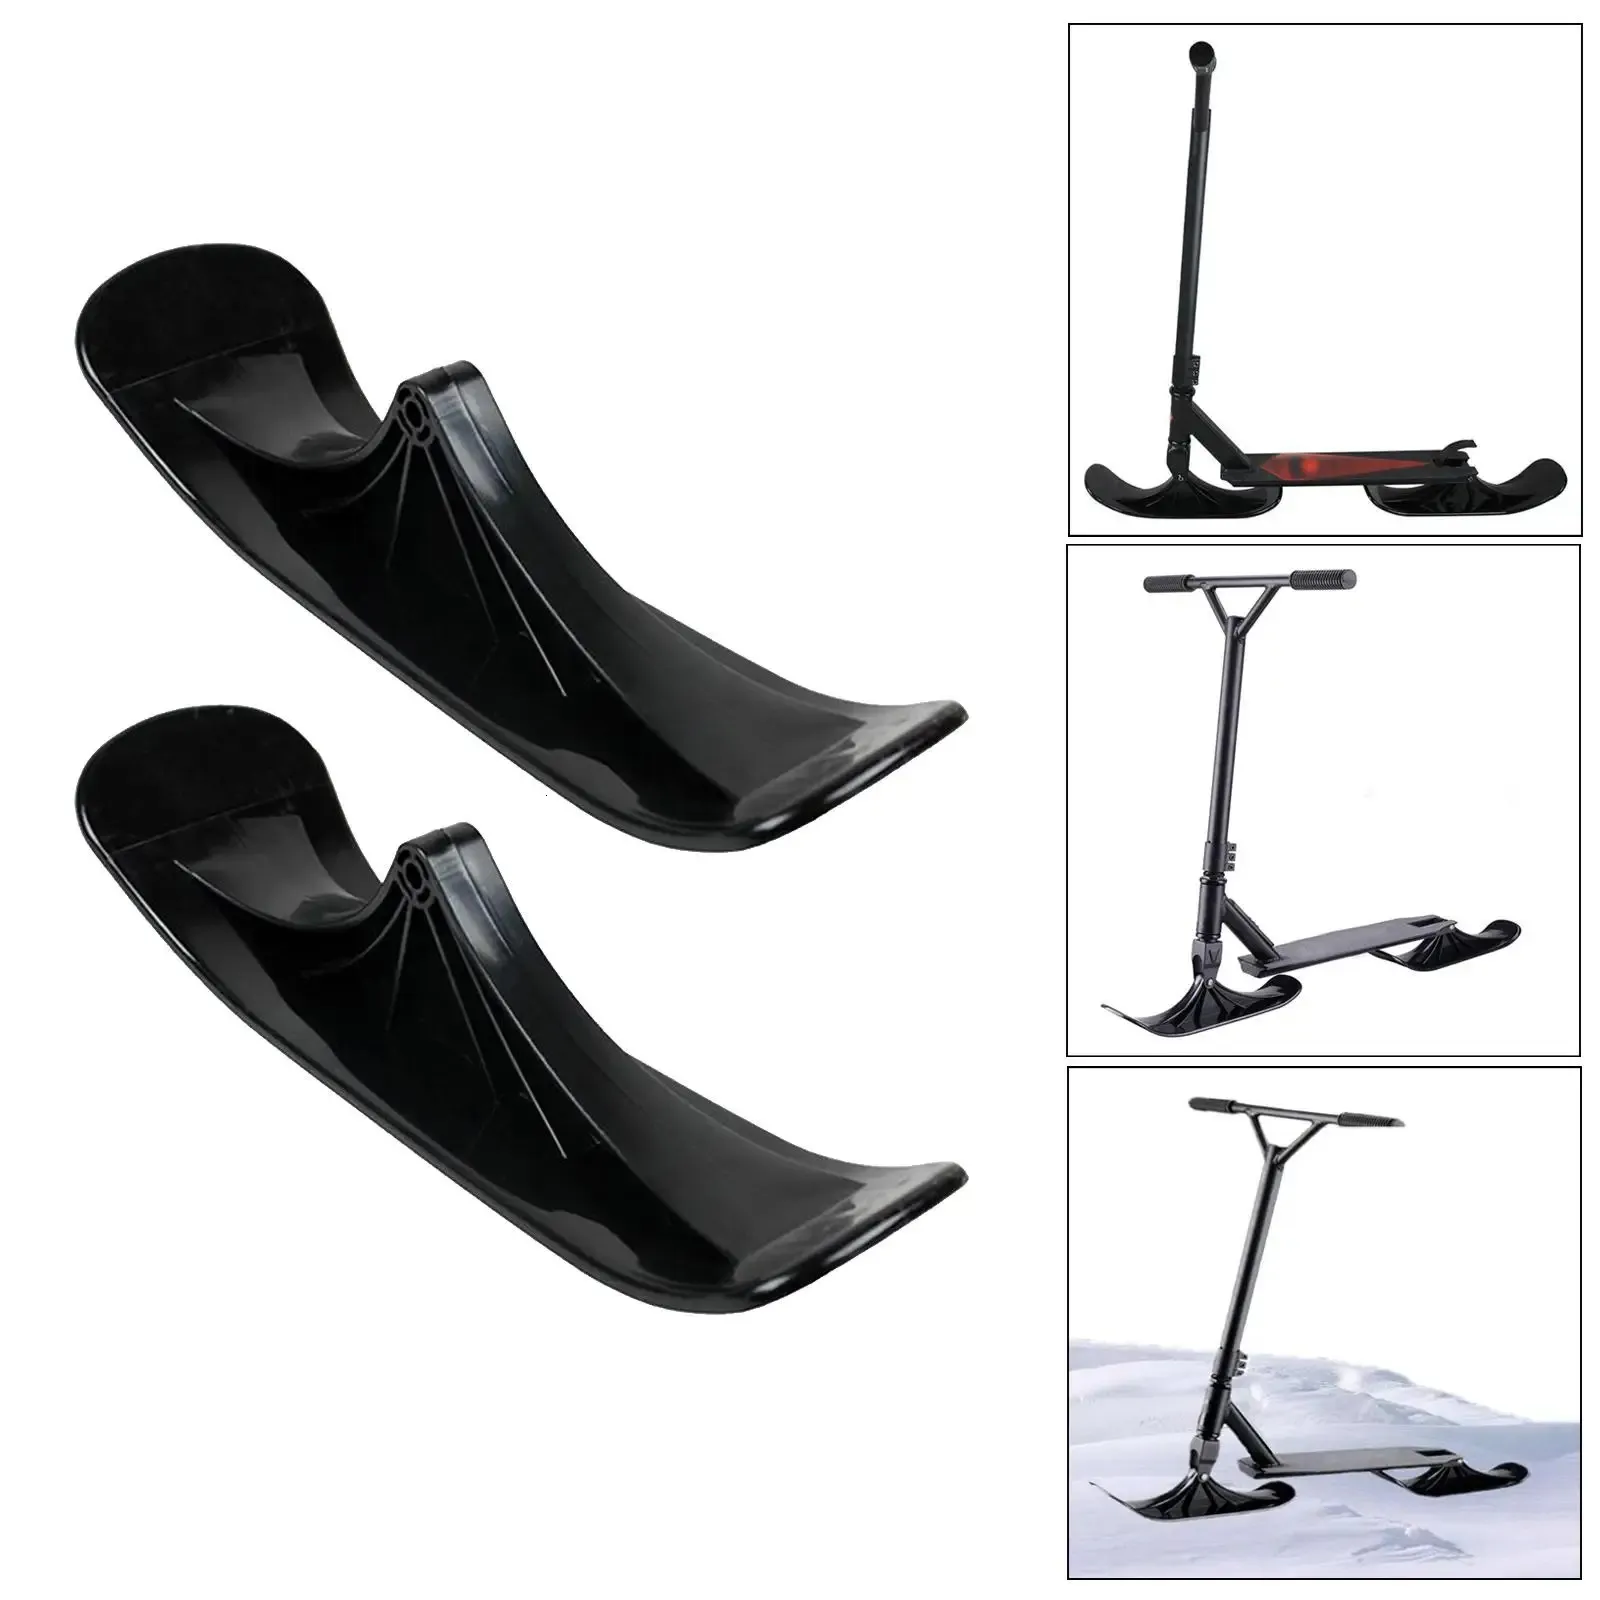 Solid Ski Snow Scooter Snowboard Kids Child Kick Scooter Turns to Snow Sled Attachments Winter Fun Toy